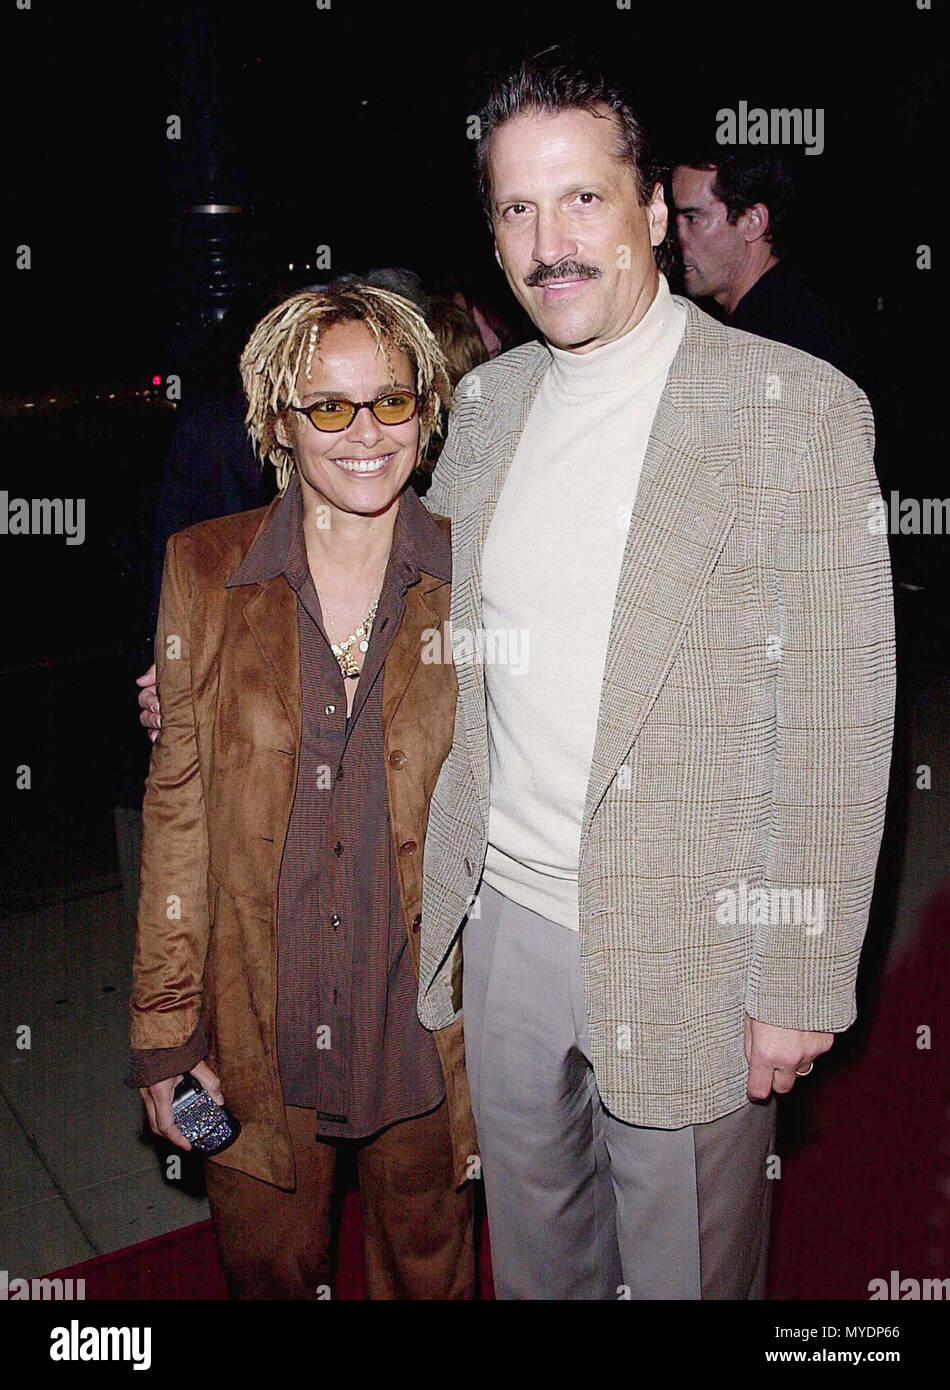 12 Oct 2000, Los Angeles, California, USA --- Original caption: Pay It Forward Premiere was held at the Academy of Motion Picture in Los Angeles. --- Image by © . / USAShari Belafonte with Husband Red Carpet Event, Vertical, USA, Film Industry, Celebrities,  Photography, Bestof, Arts Culture and Entertainment, Topix Celebrities fashion /  Vertical, Best of, Event in Hollywood Life - California,  Red Carpet and backstage, USA, Film Industry, Celebrities,  movie celebrities, TV celebrities, Music celebrities, Photography, Bestof, Arts Culture and Entertainment,  Topix,  vertical,, inquiry tsuni@ Stock Photo